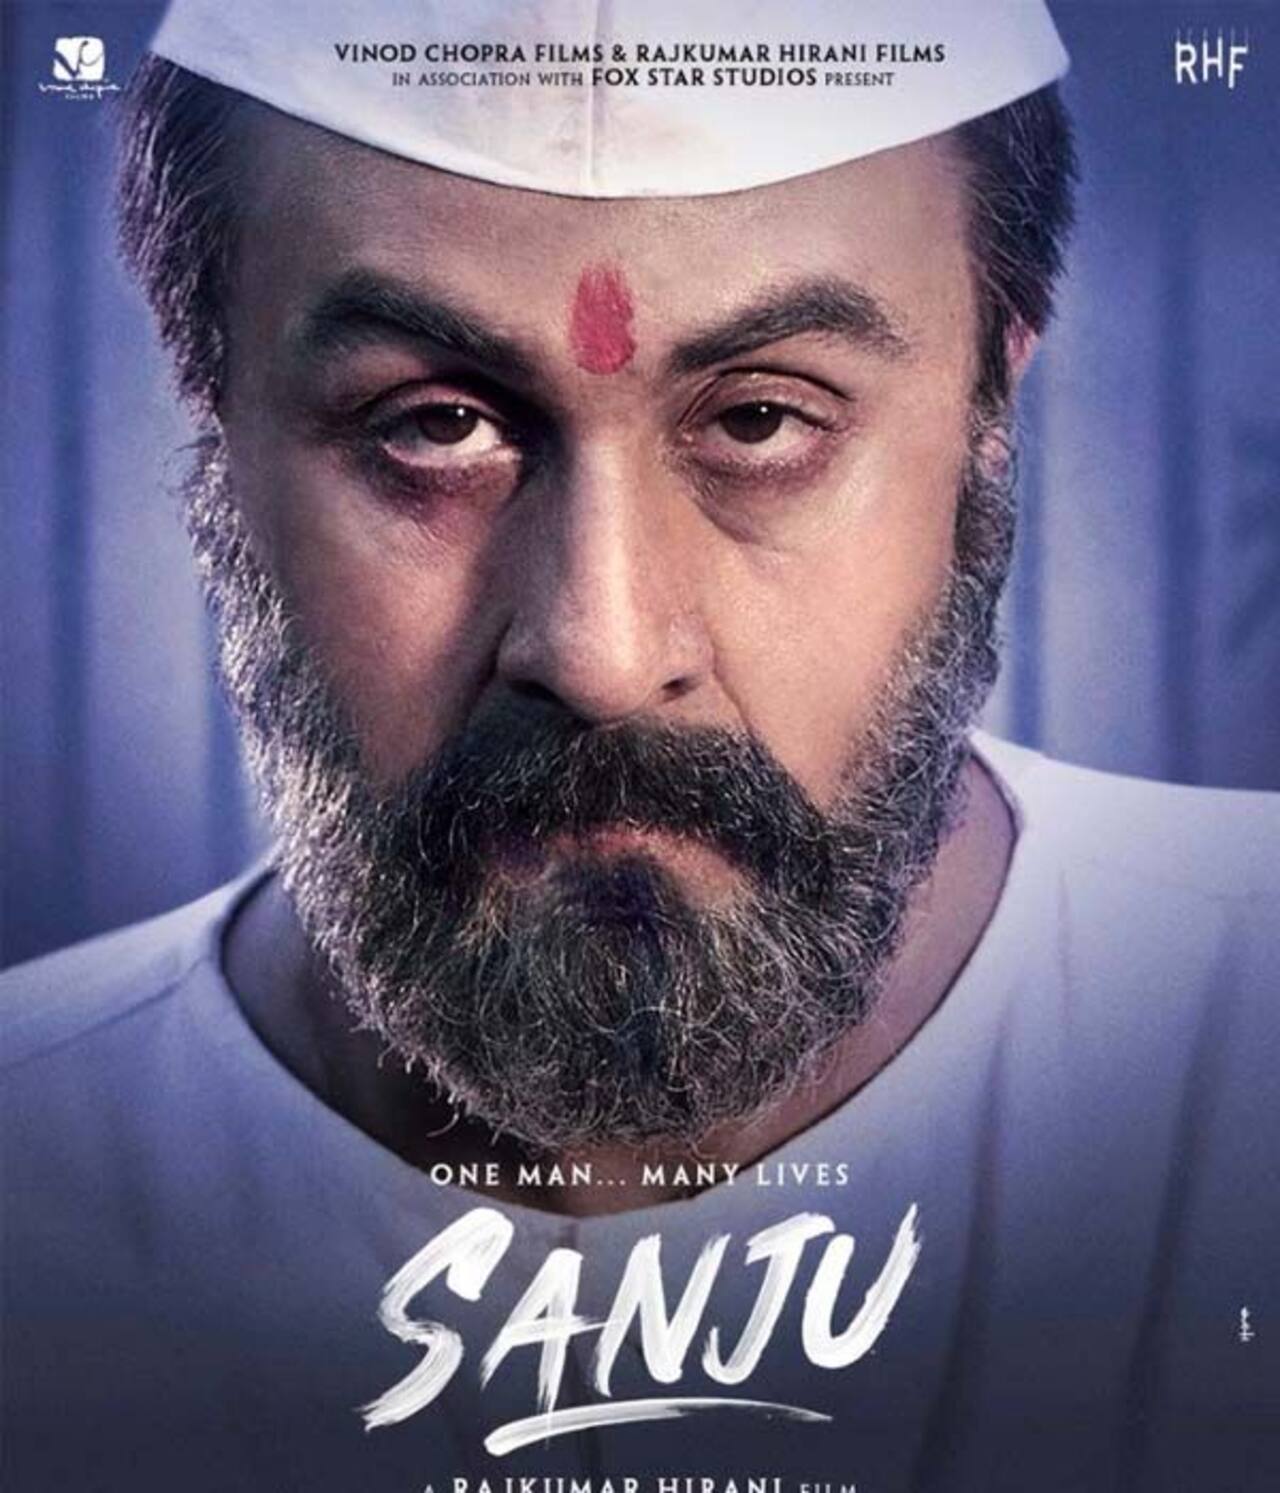 Sanju Box Office Collection Day 1 Ranbir Kapoors Film Opens To A Thunderous Response Earns Rs